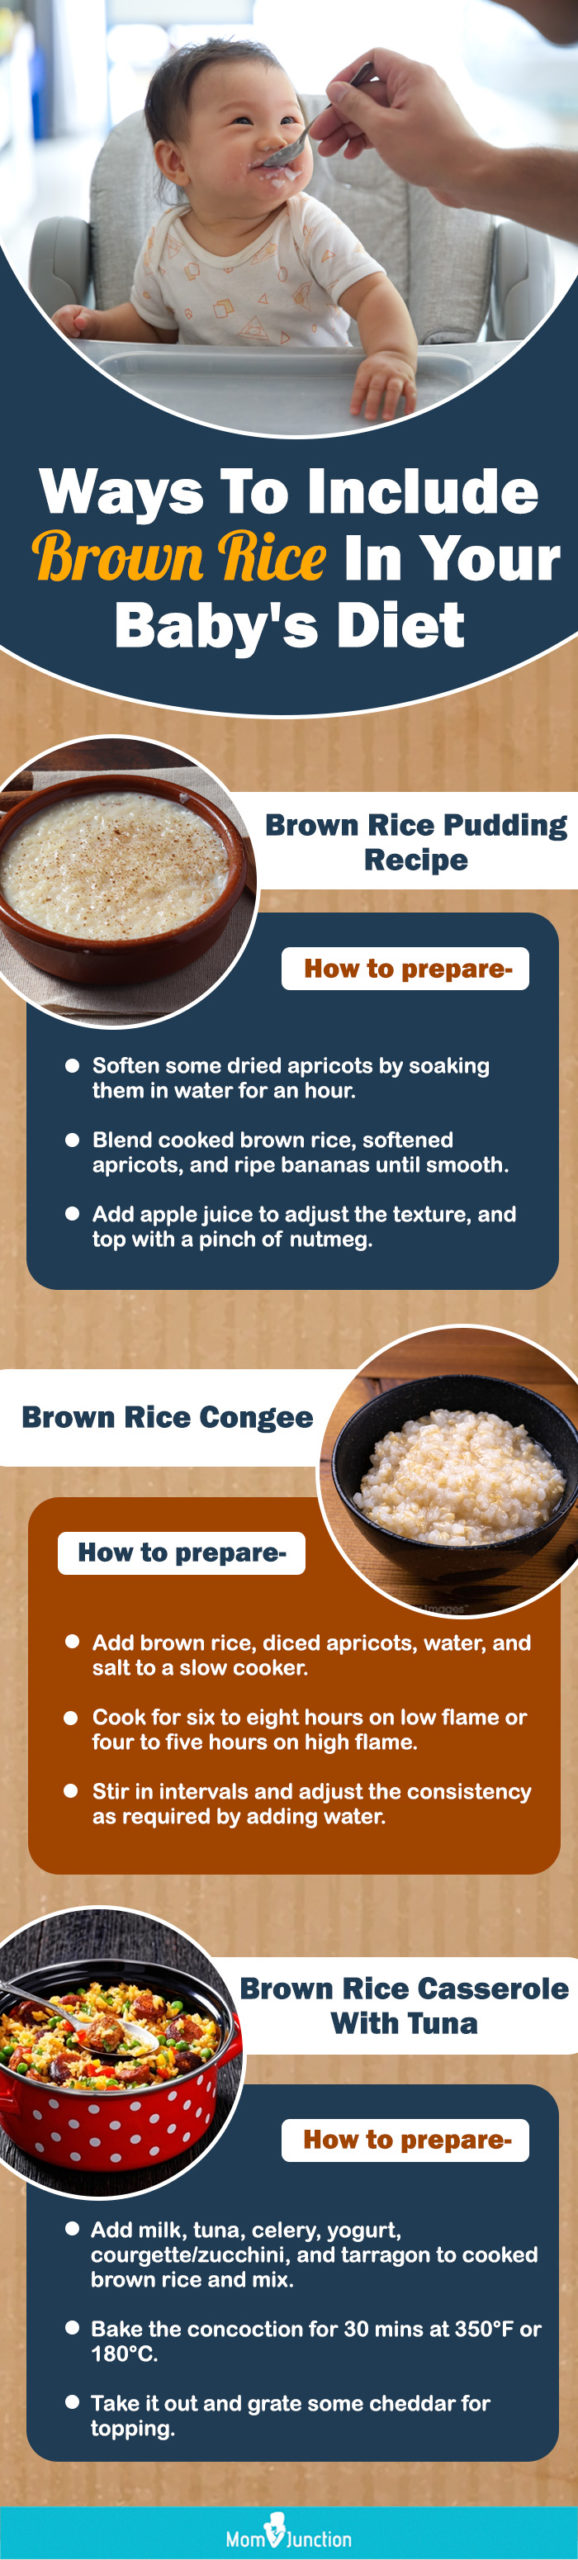 Brown rice for babies